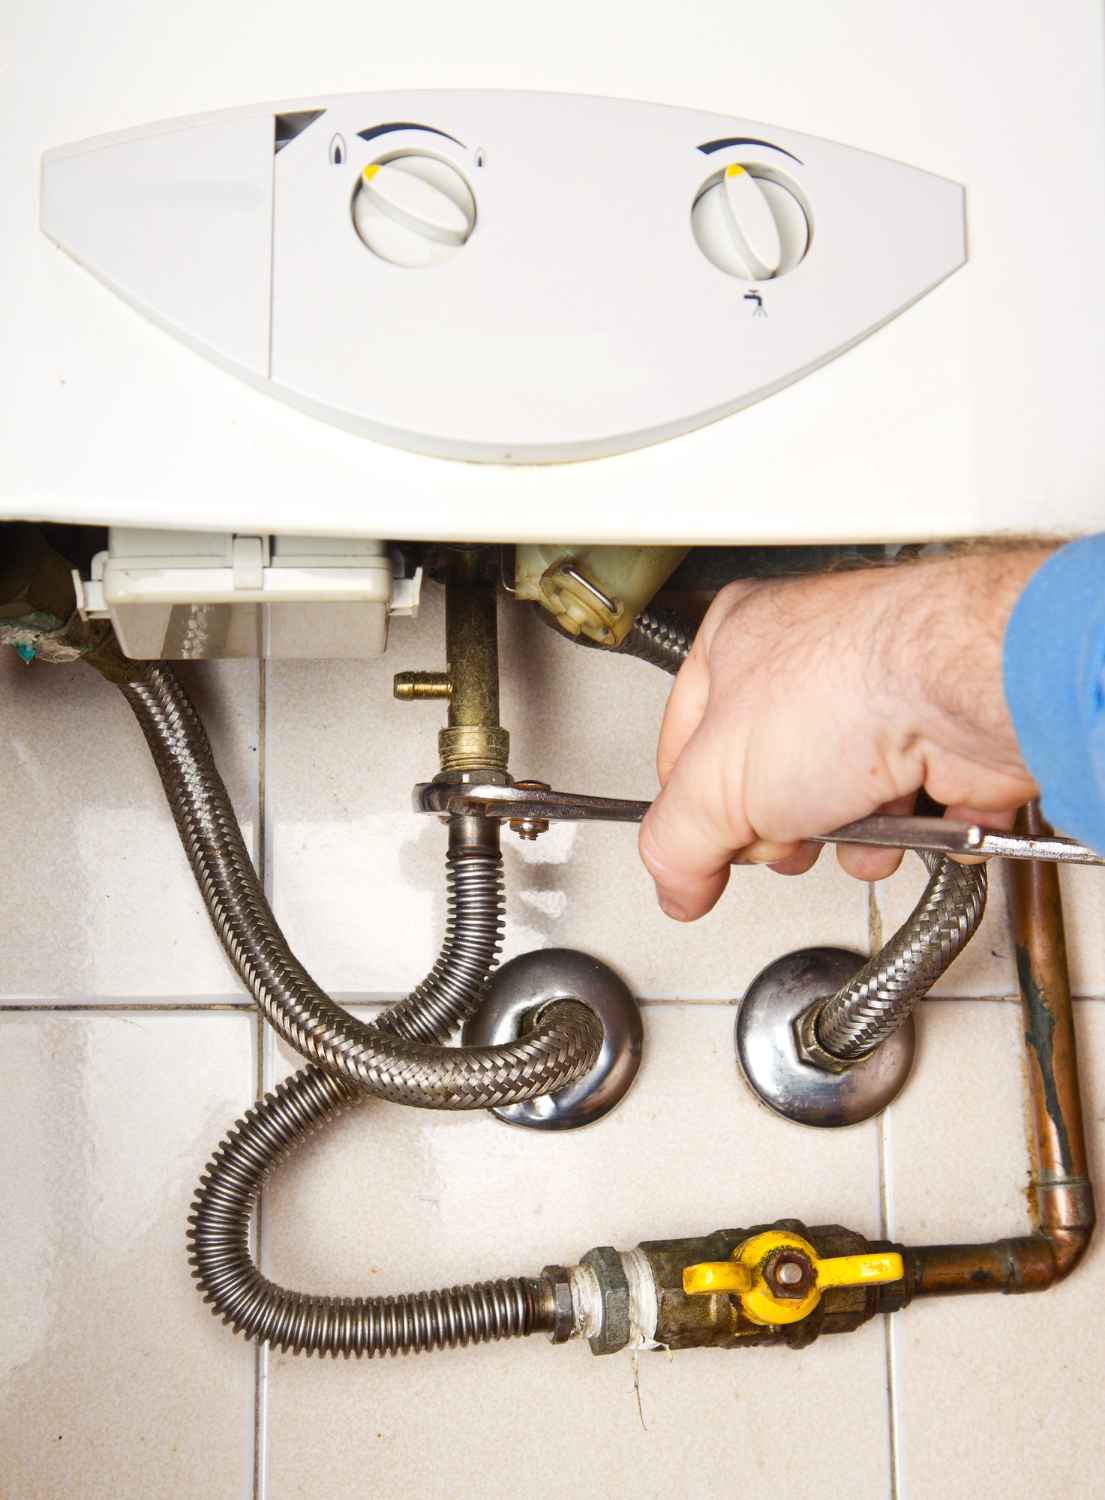 Flushing Your Central Heating System